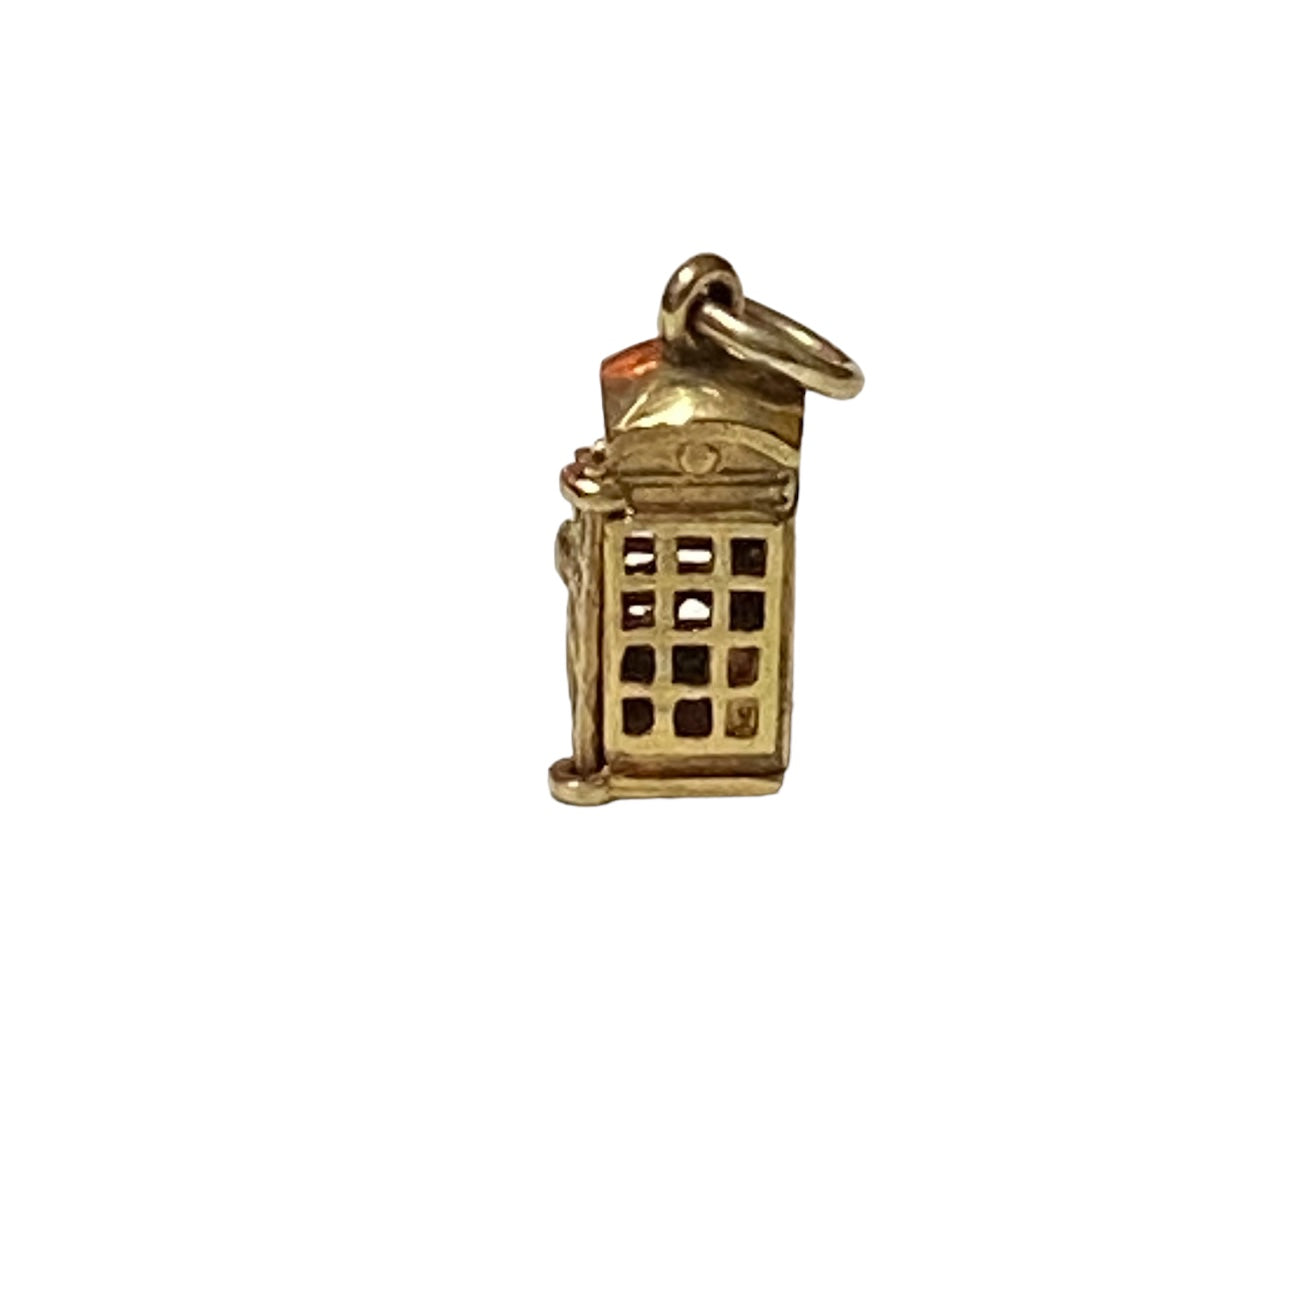 9ct vintage telephone booth charm. opening